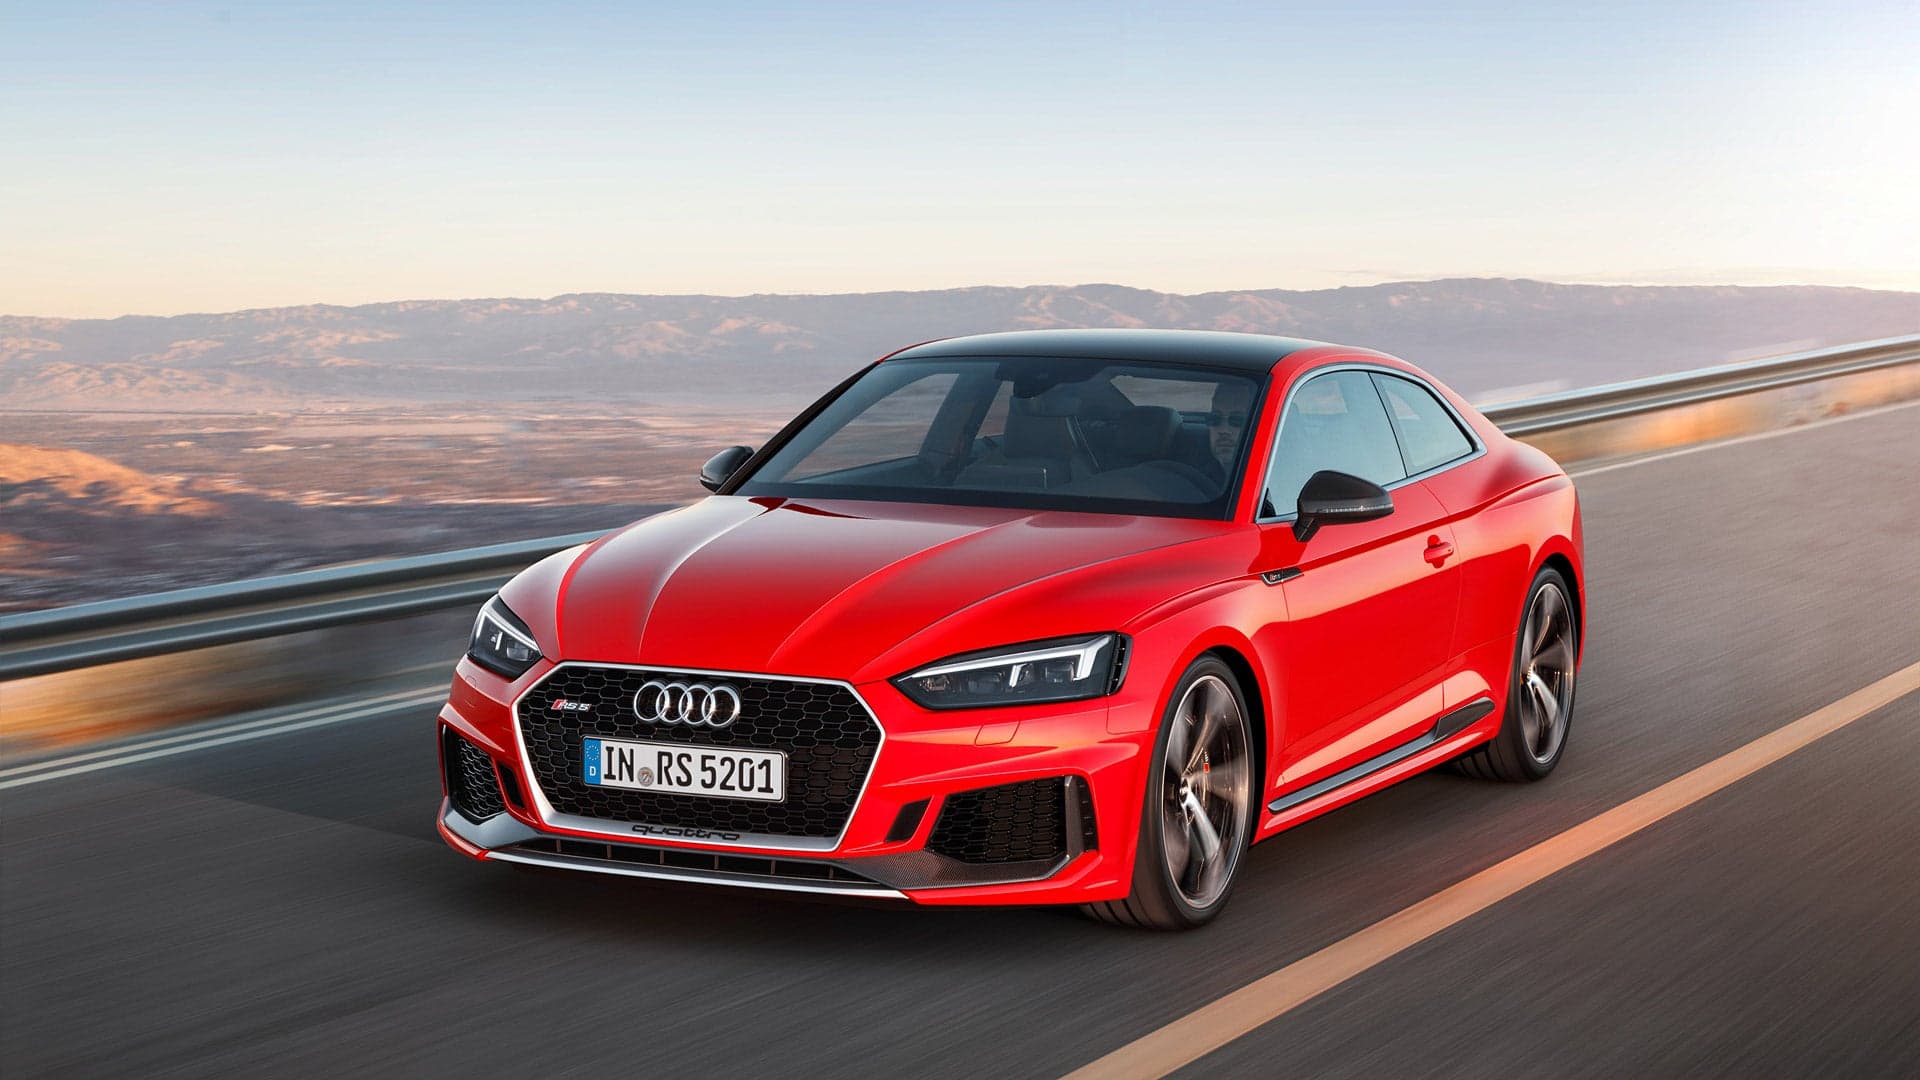 2018 Audi RS5 is U.S. Bound, Audi Sport Brand Launches